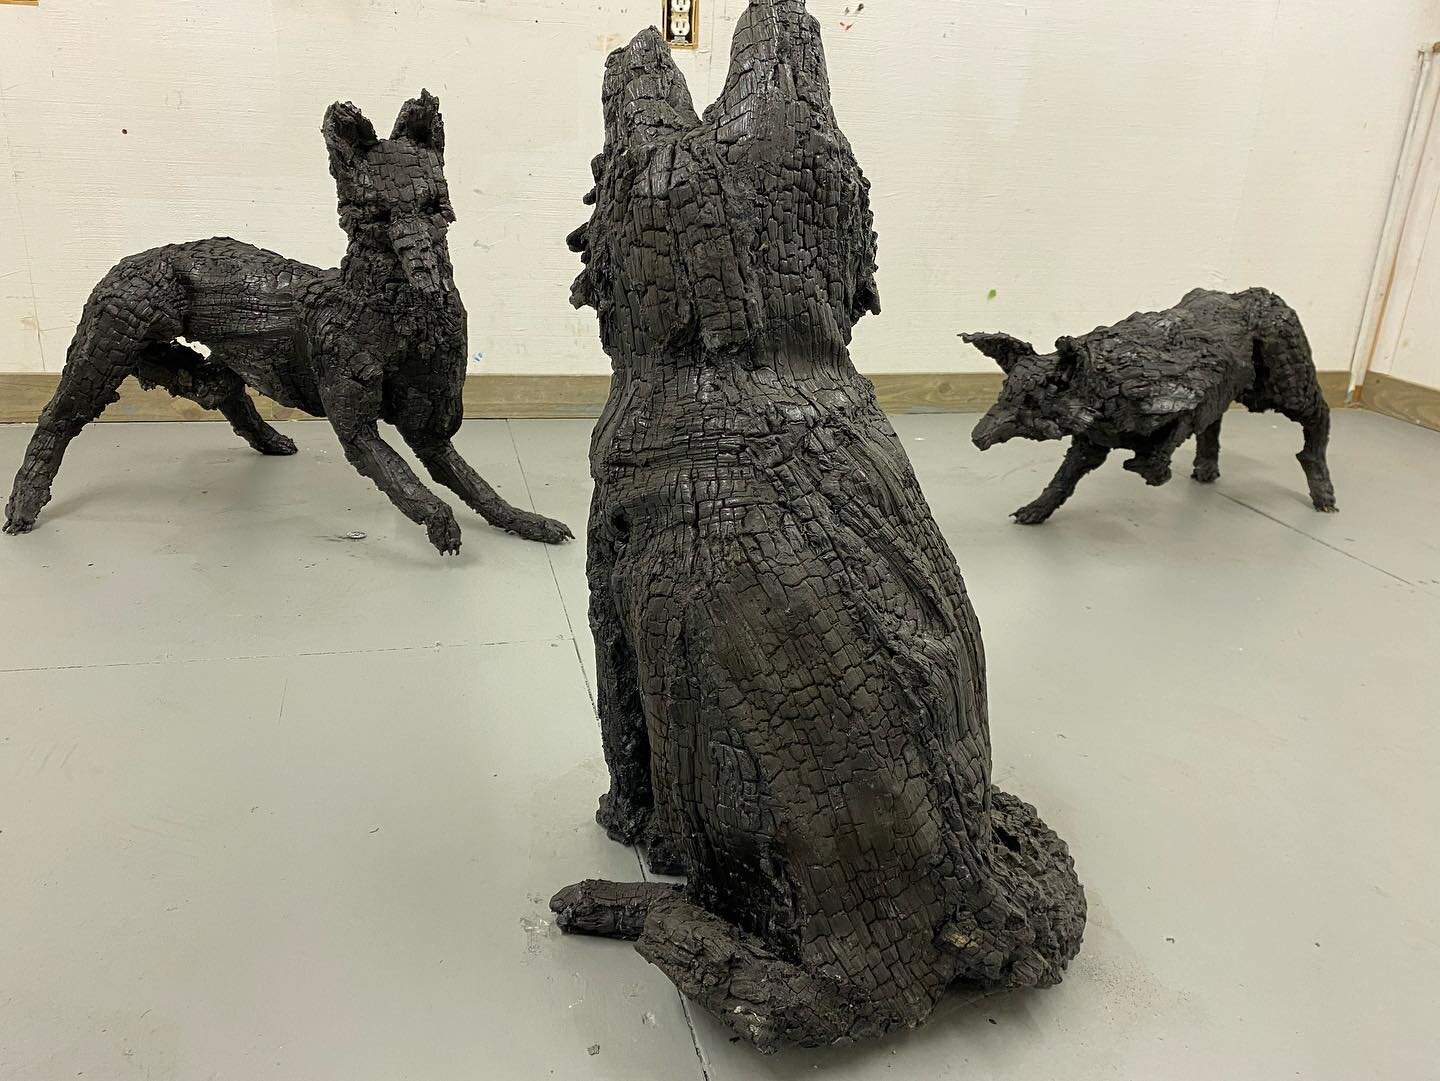 Happy to display some new work last night -&gt;Charcoal  Fox series ponders nature from an angle of altered surfaces and changing states of matter. These life-size works open up a dialogue on the transience of time, life and death.

#Sculpture #Sculp